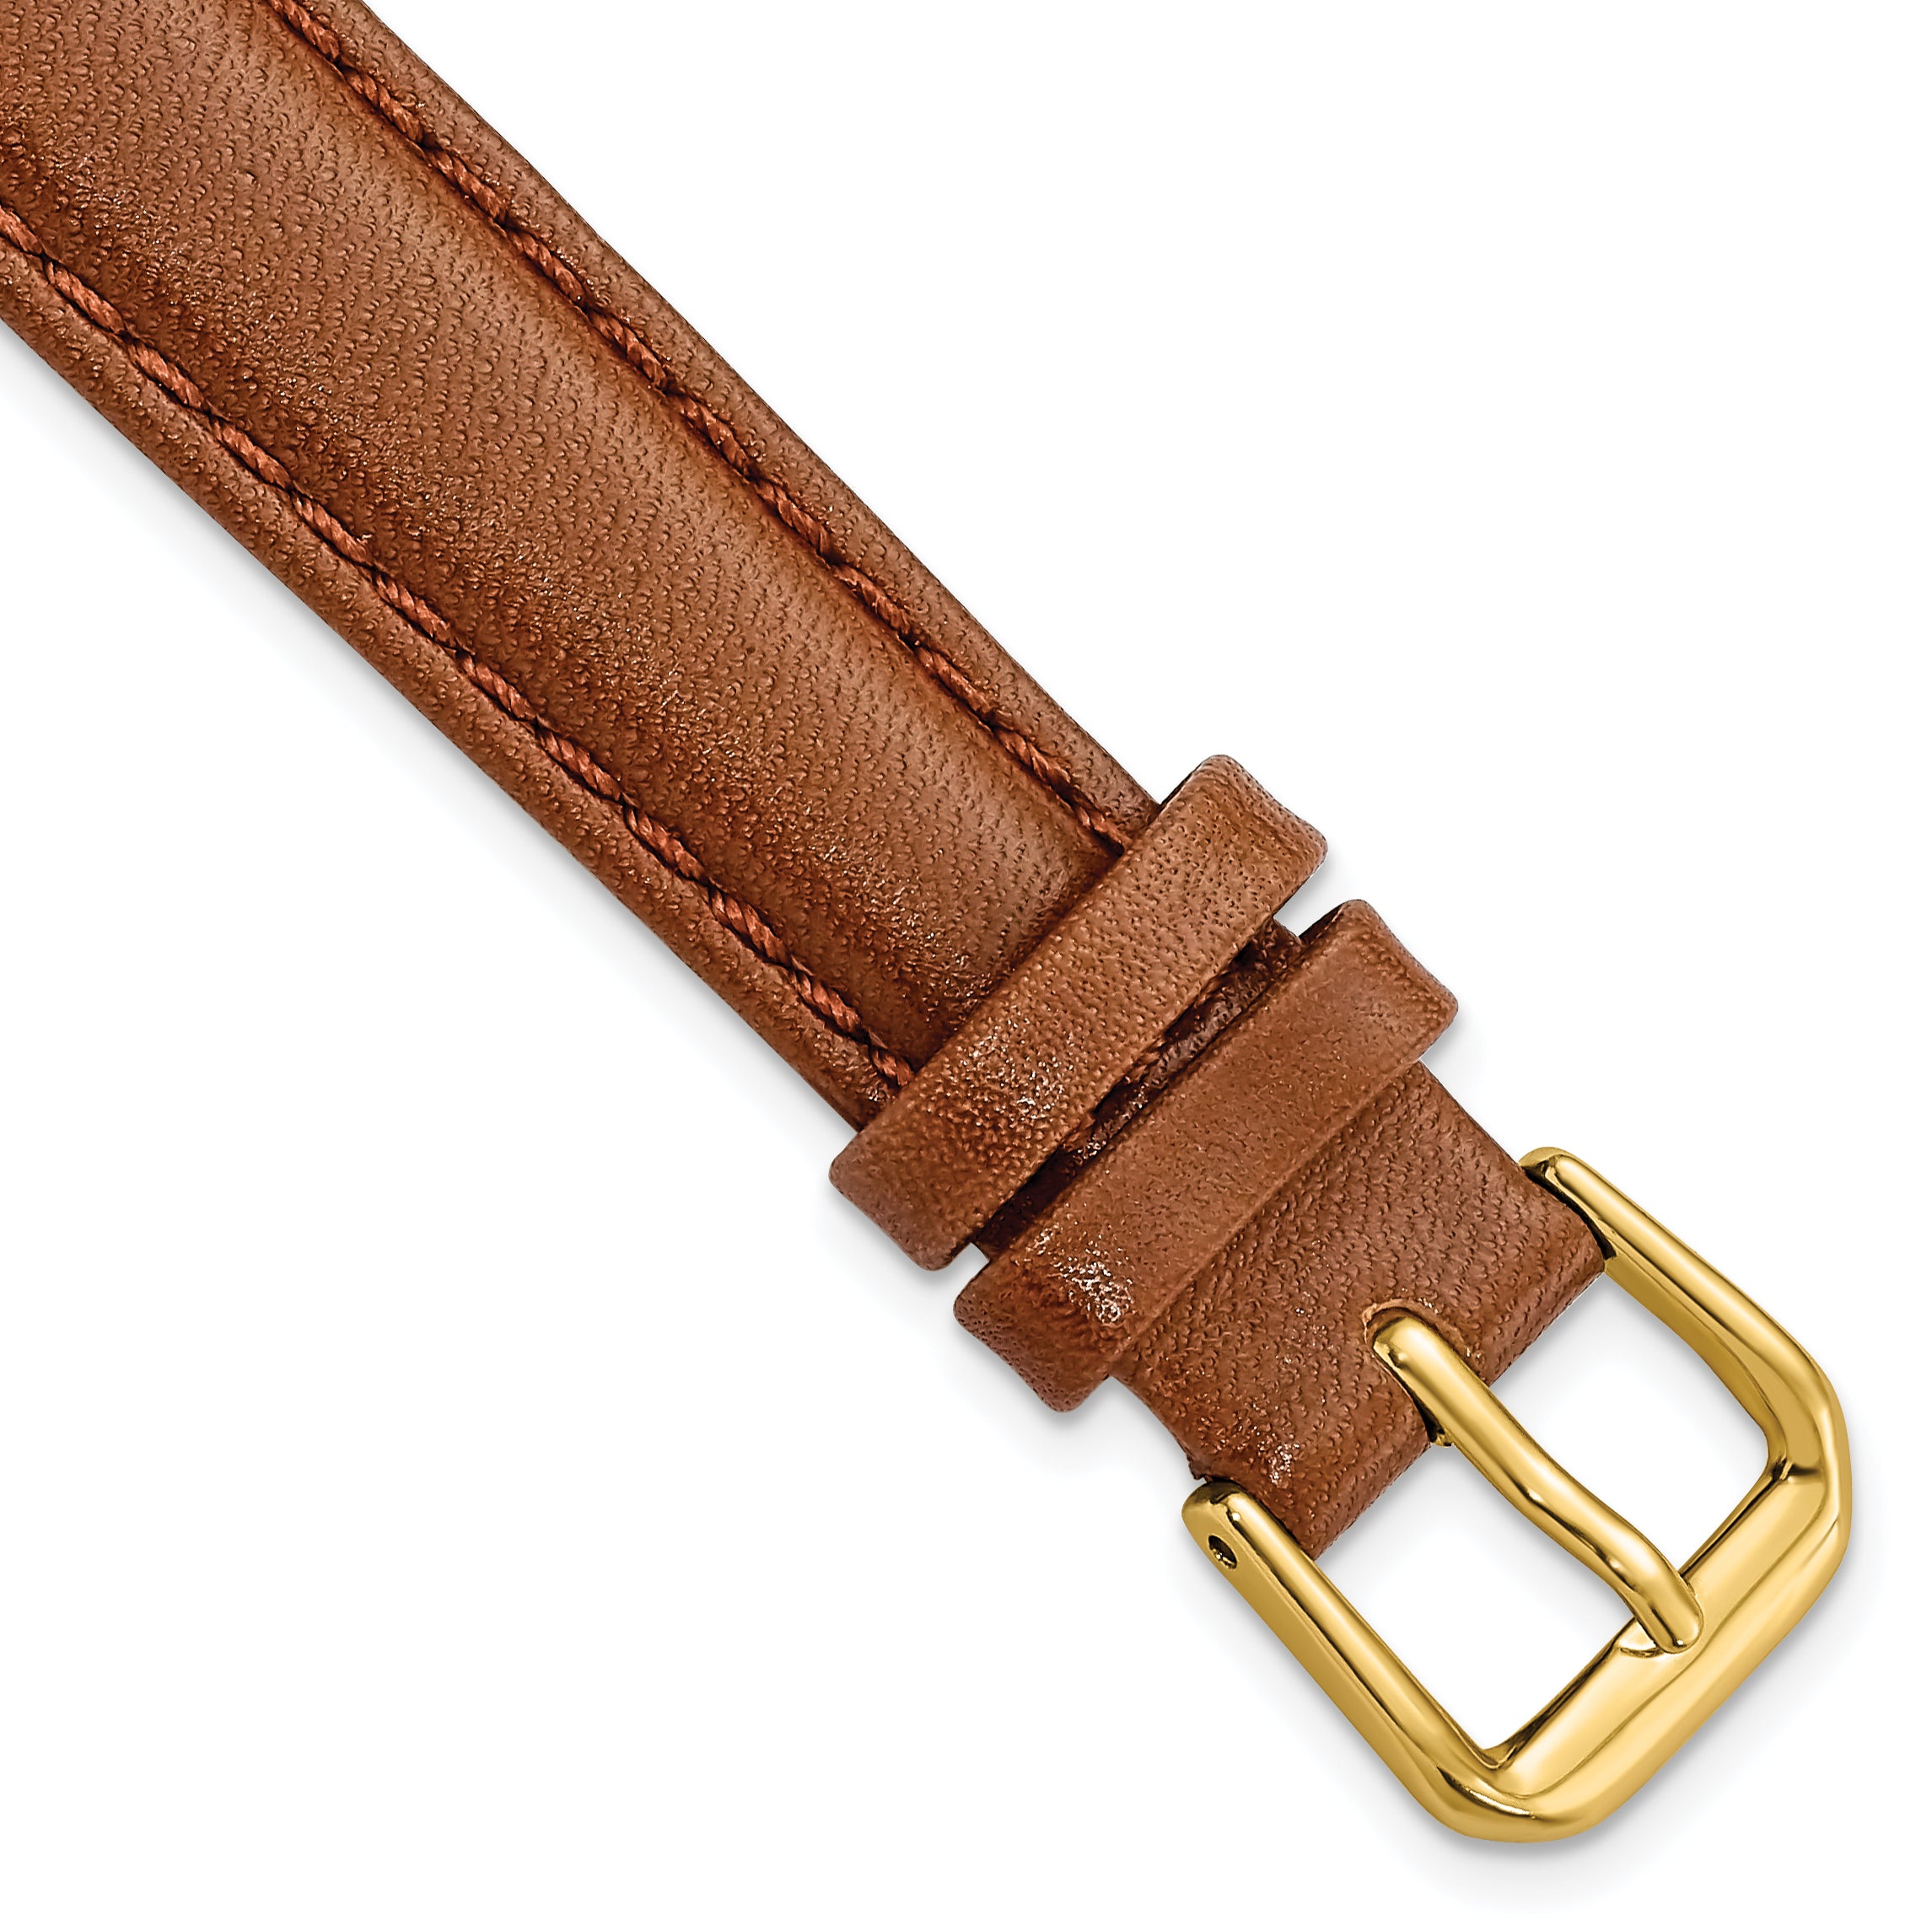 DeBeer 14mm Havana Smooth Leather with Gold-tone Buckle 6.75 inch Watch Band